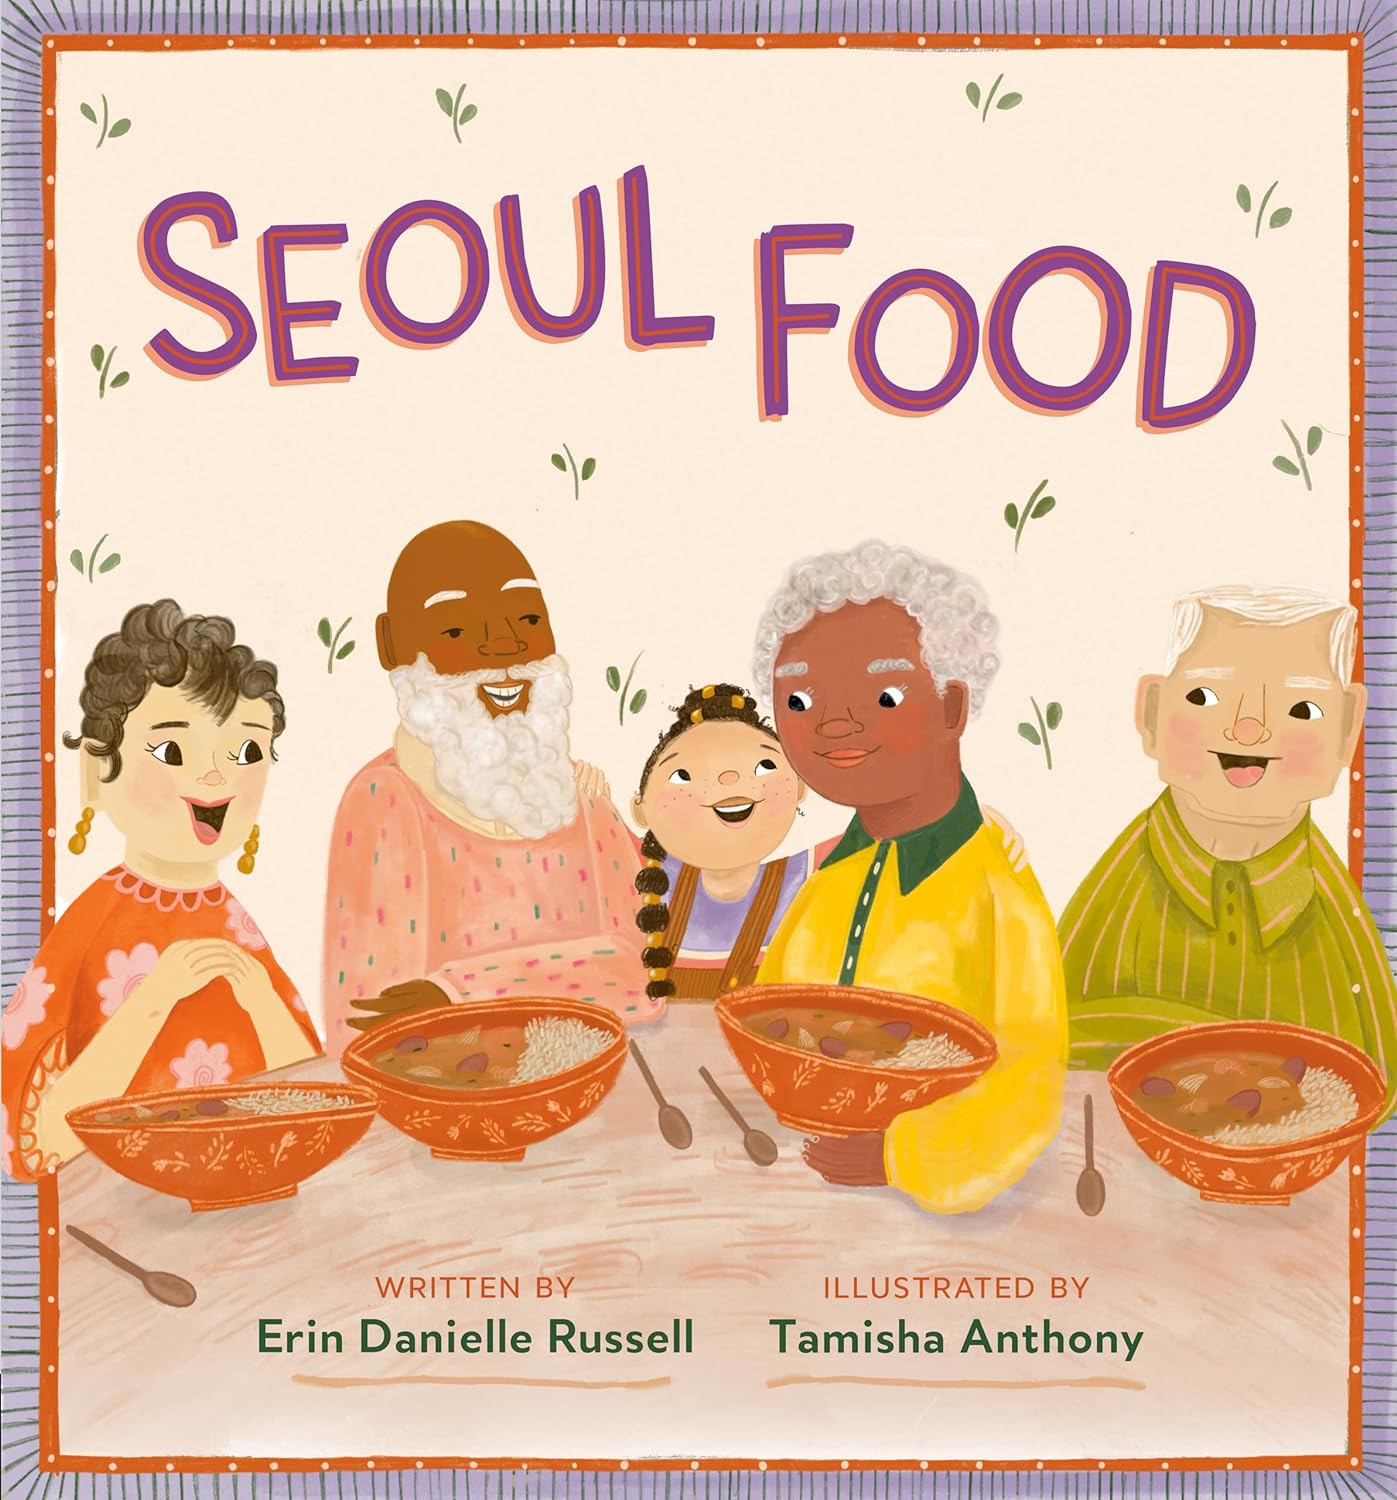 Seoul Food children's book about mixed Asian-Black kids and family